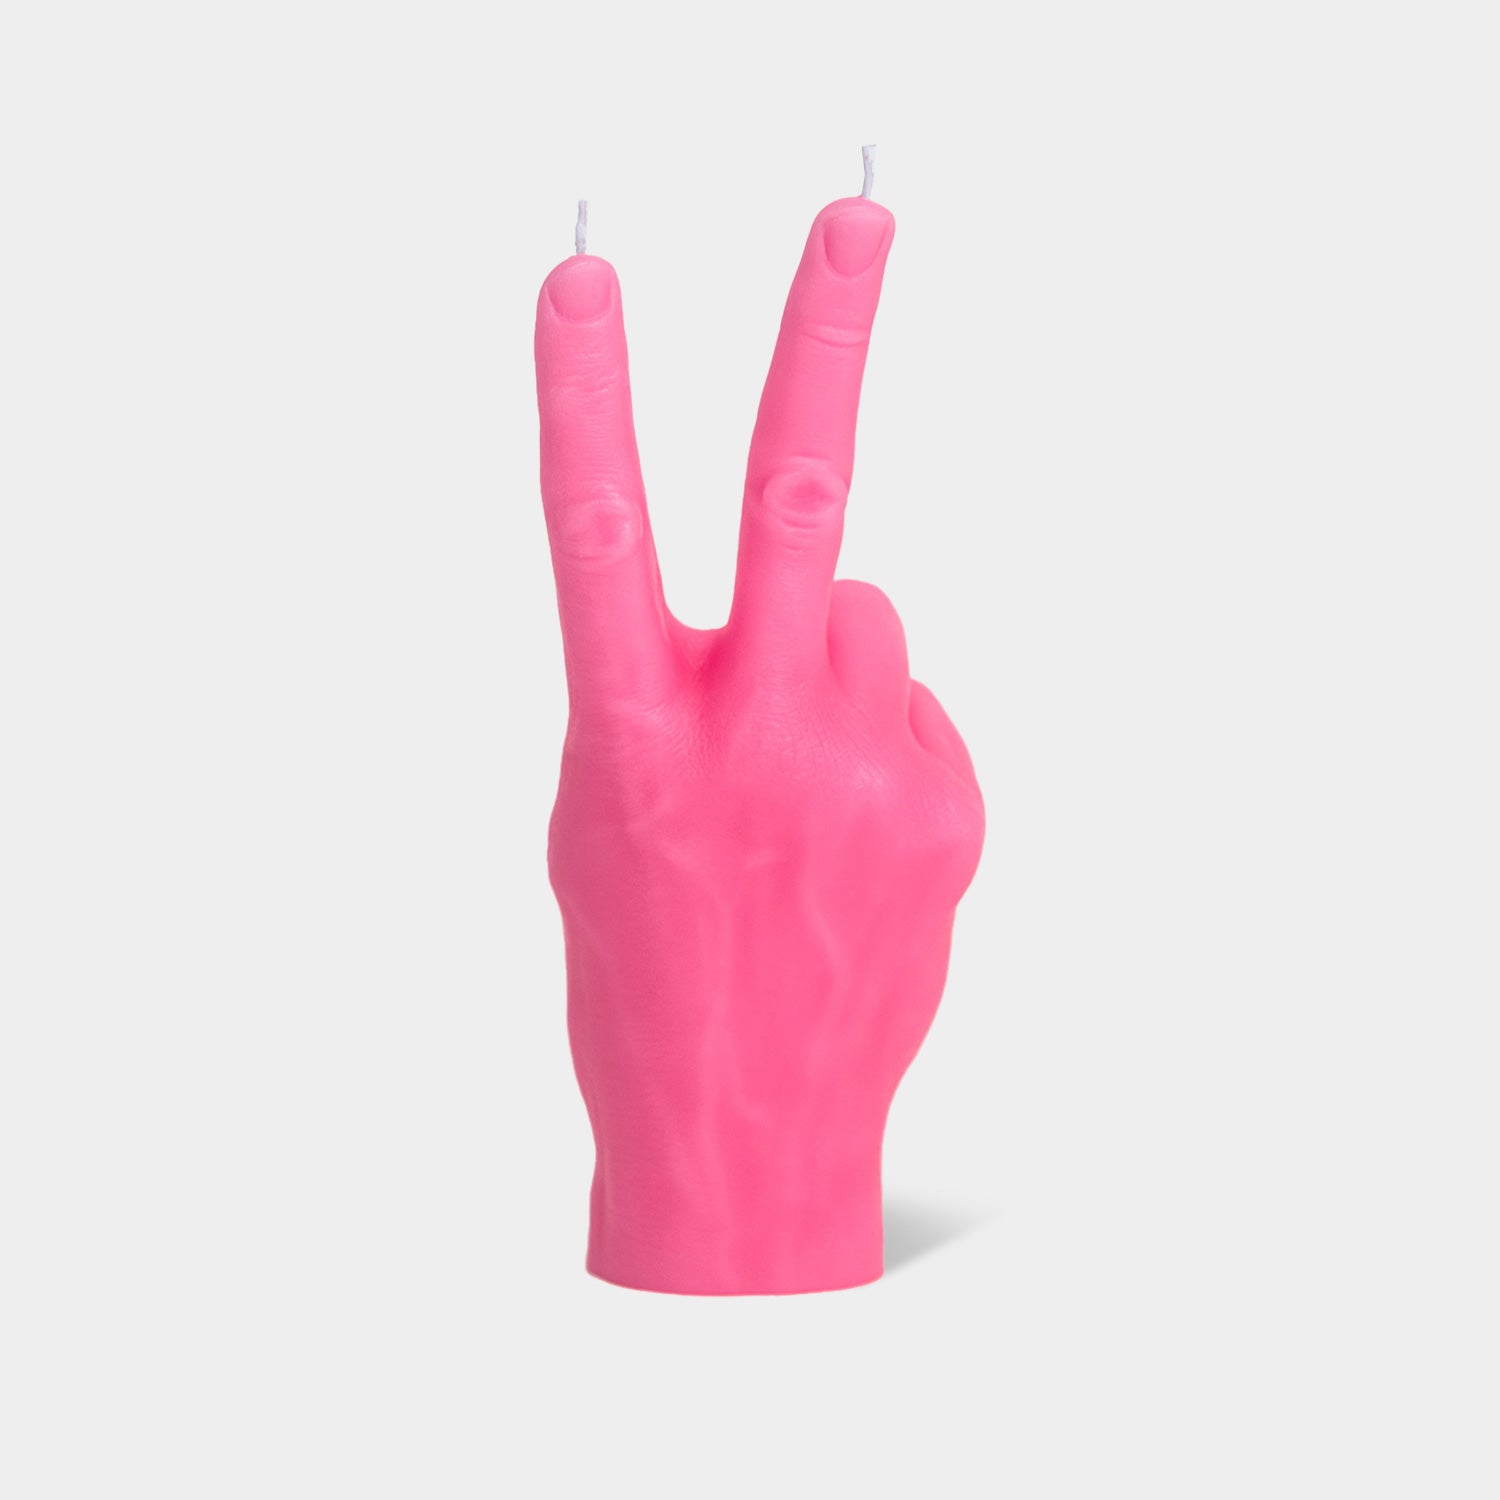 Wholesale CandleHand Hand Gesture Candle - Middle Finger for your